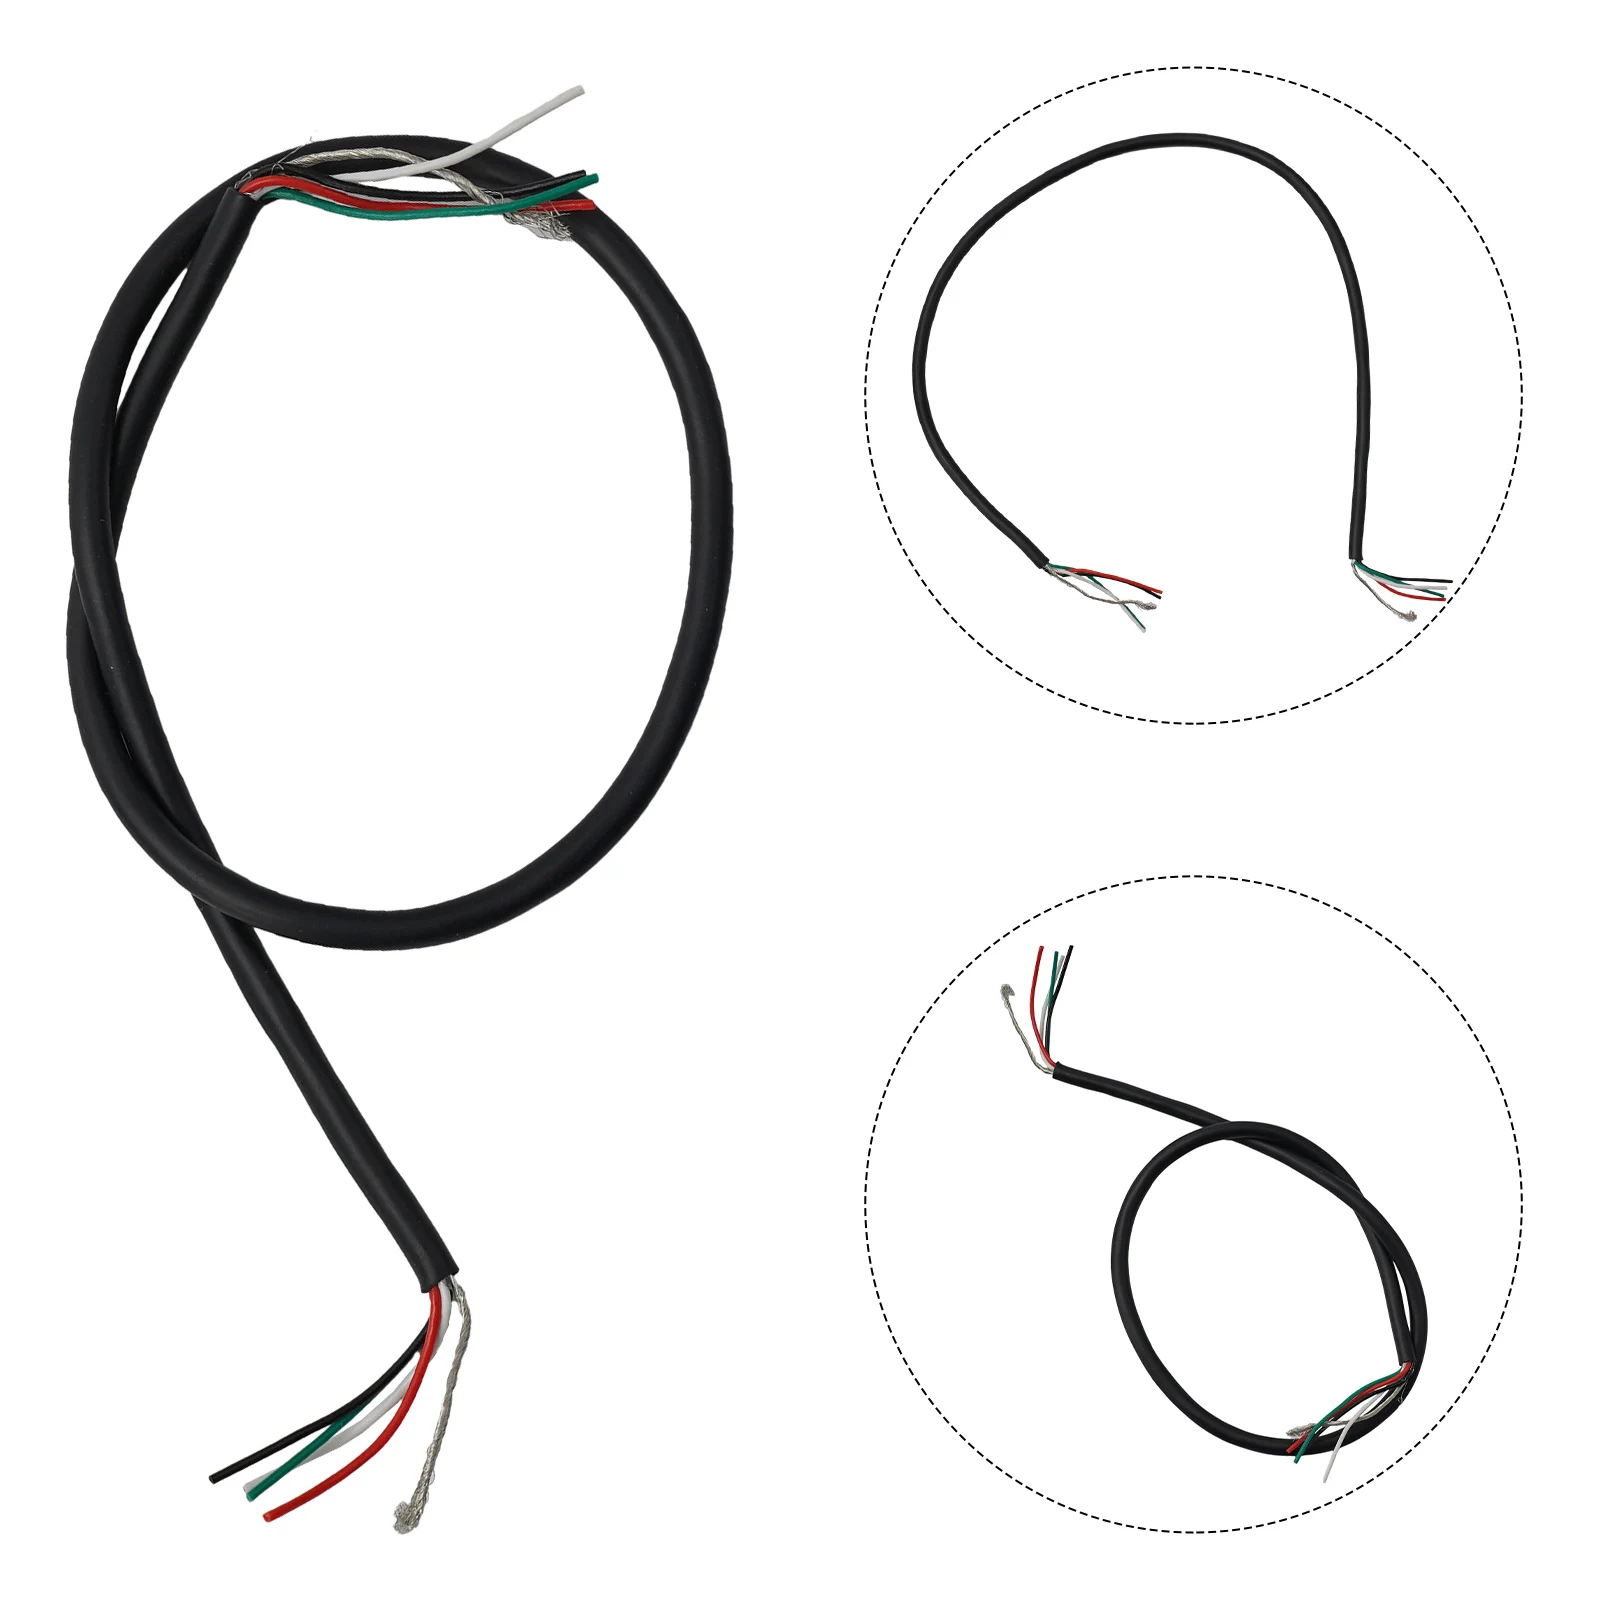 

4 Conductor Pickup Hookup Wire Shielded Guitar Pickup Cable Circuit Hookup Guitar Shielded Line Musical Instrument Accessories